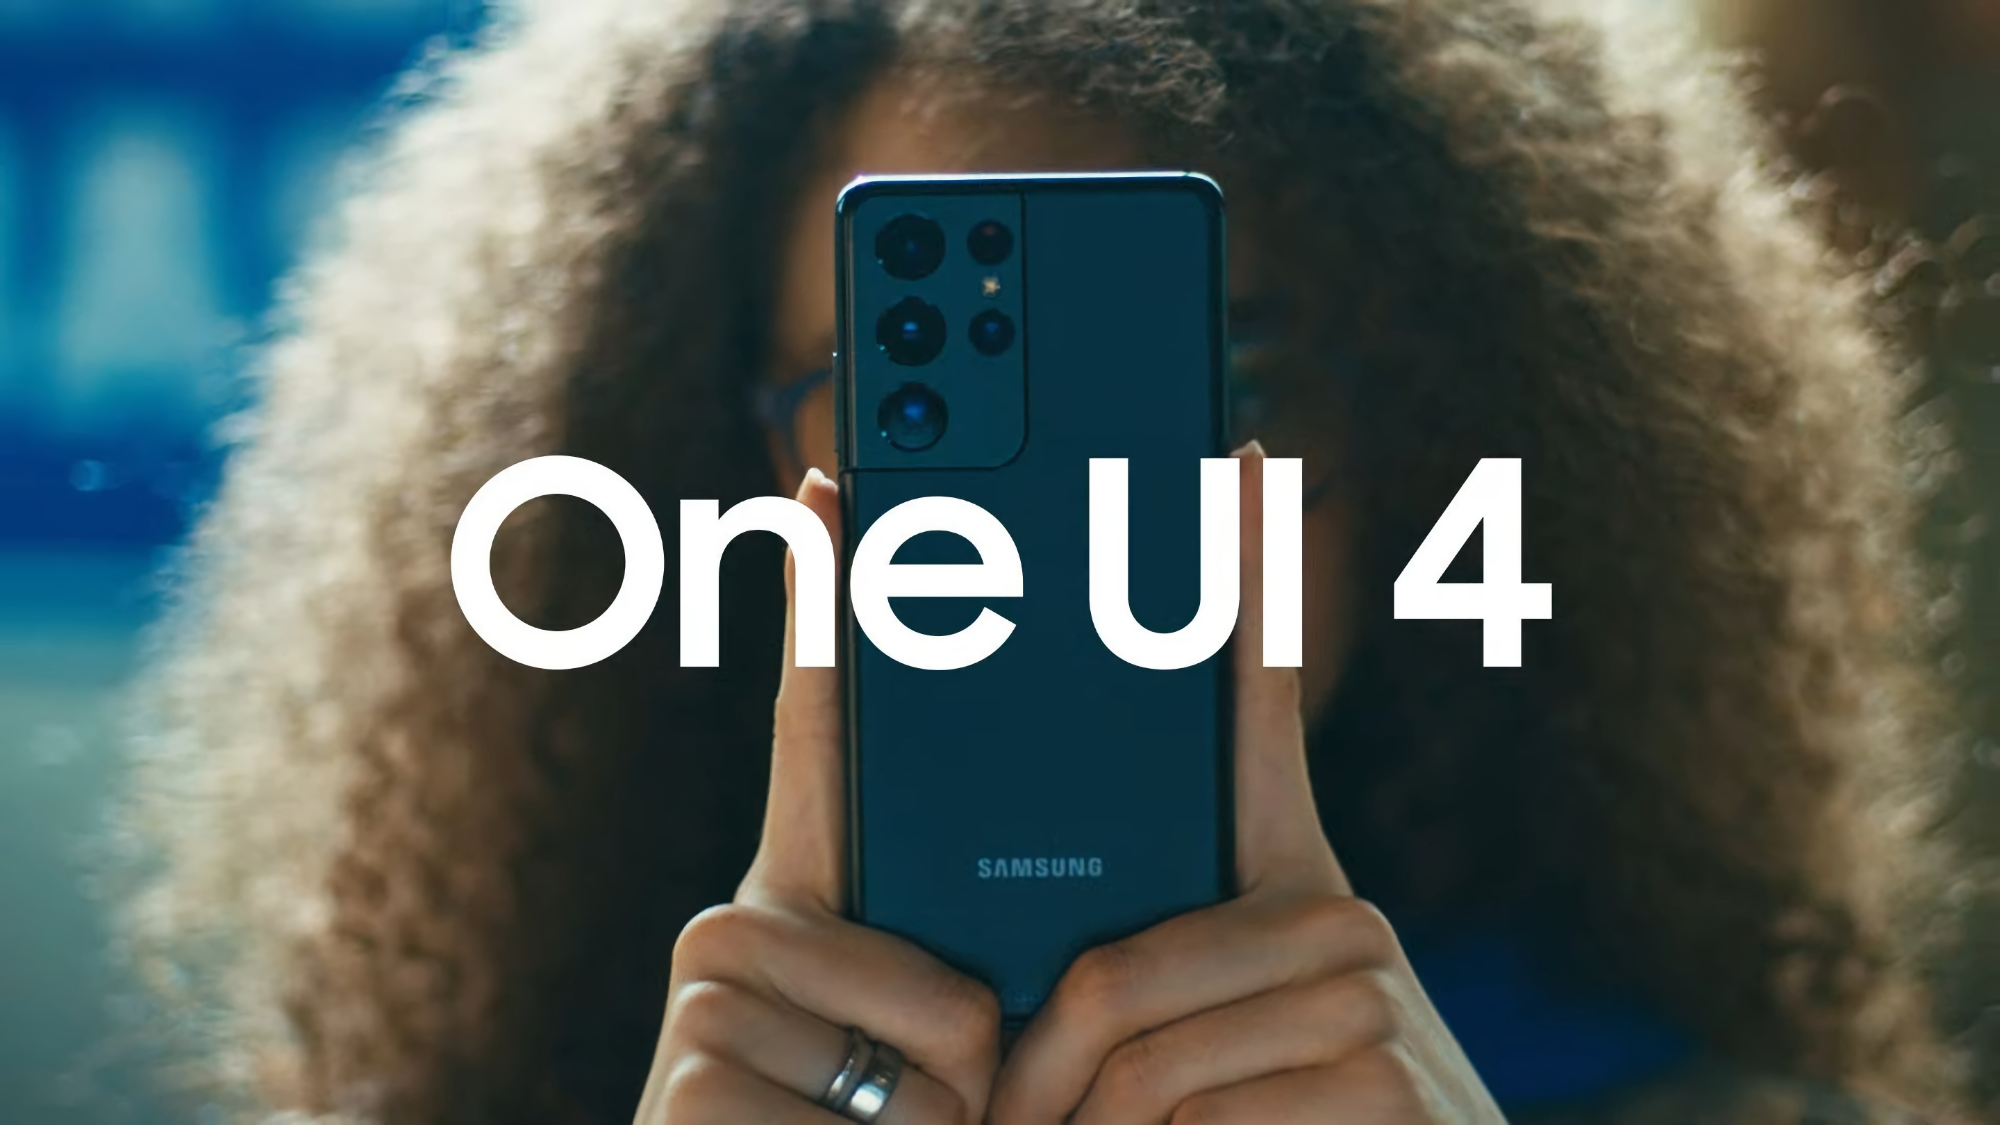 Samsung has released the third beta version of One UI 4 for the Galaxy S21 with ads removed, new animations and the Weather app